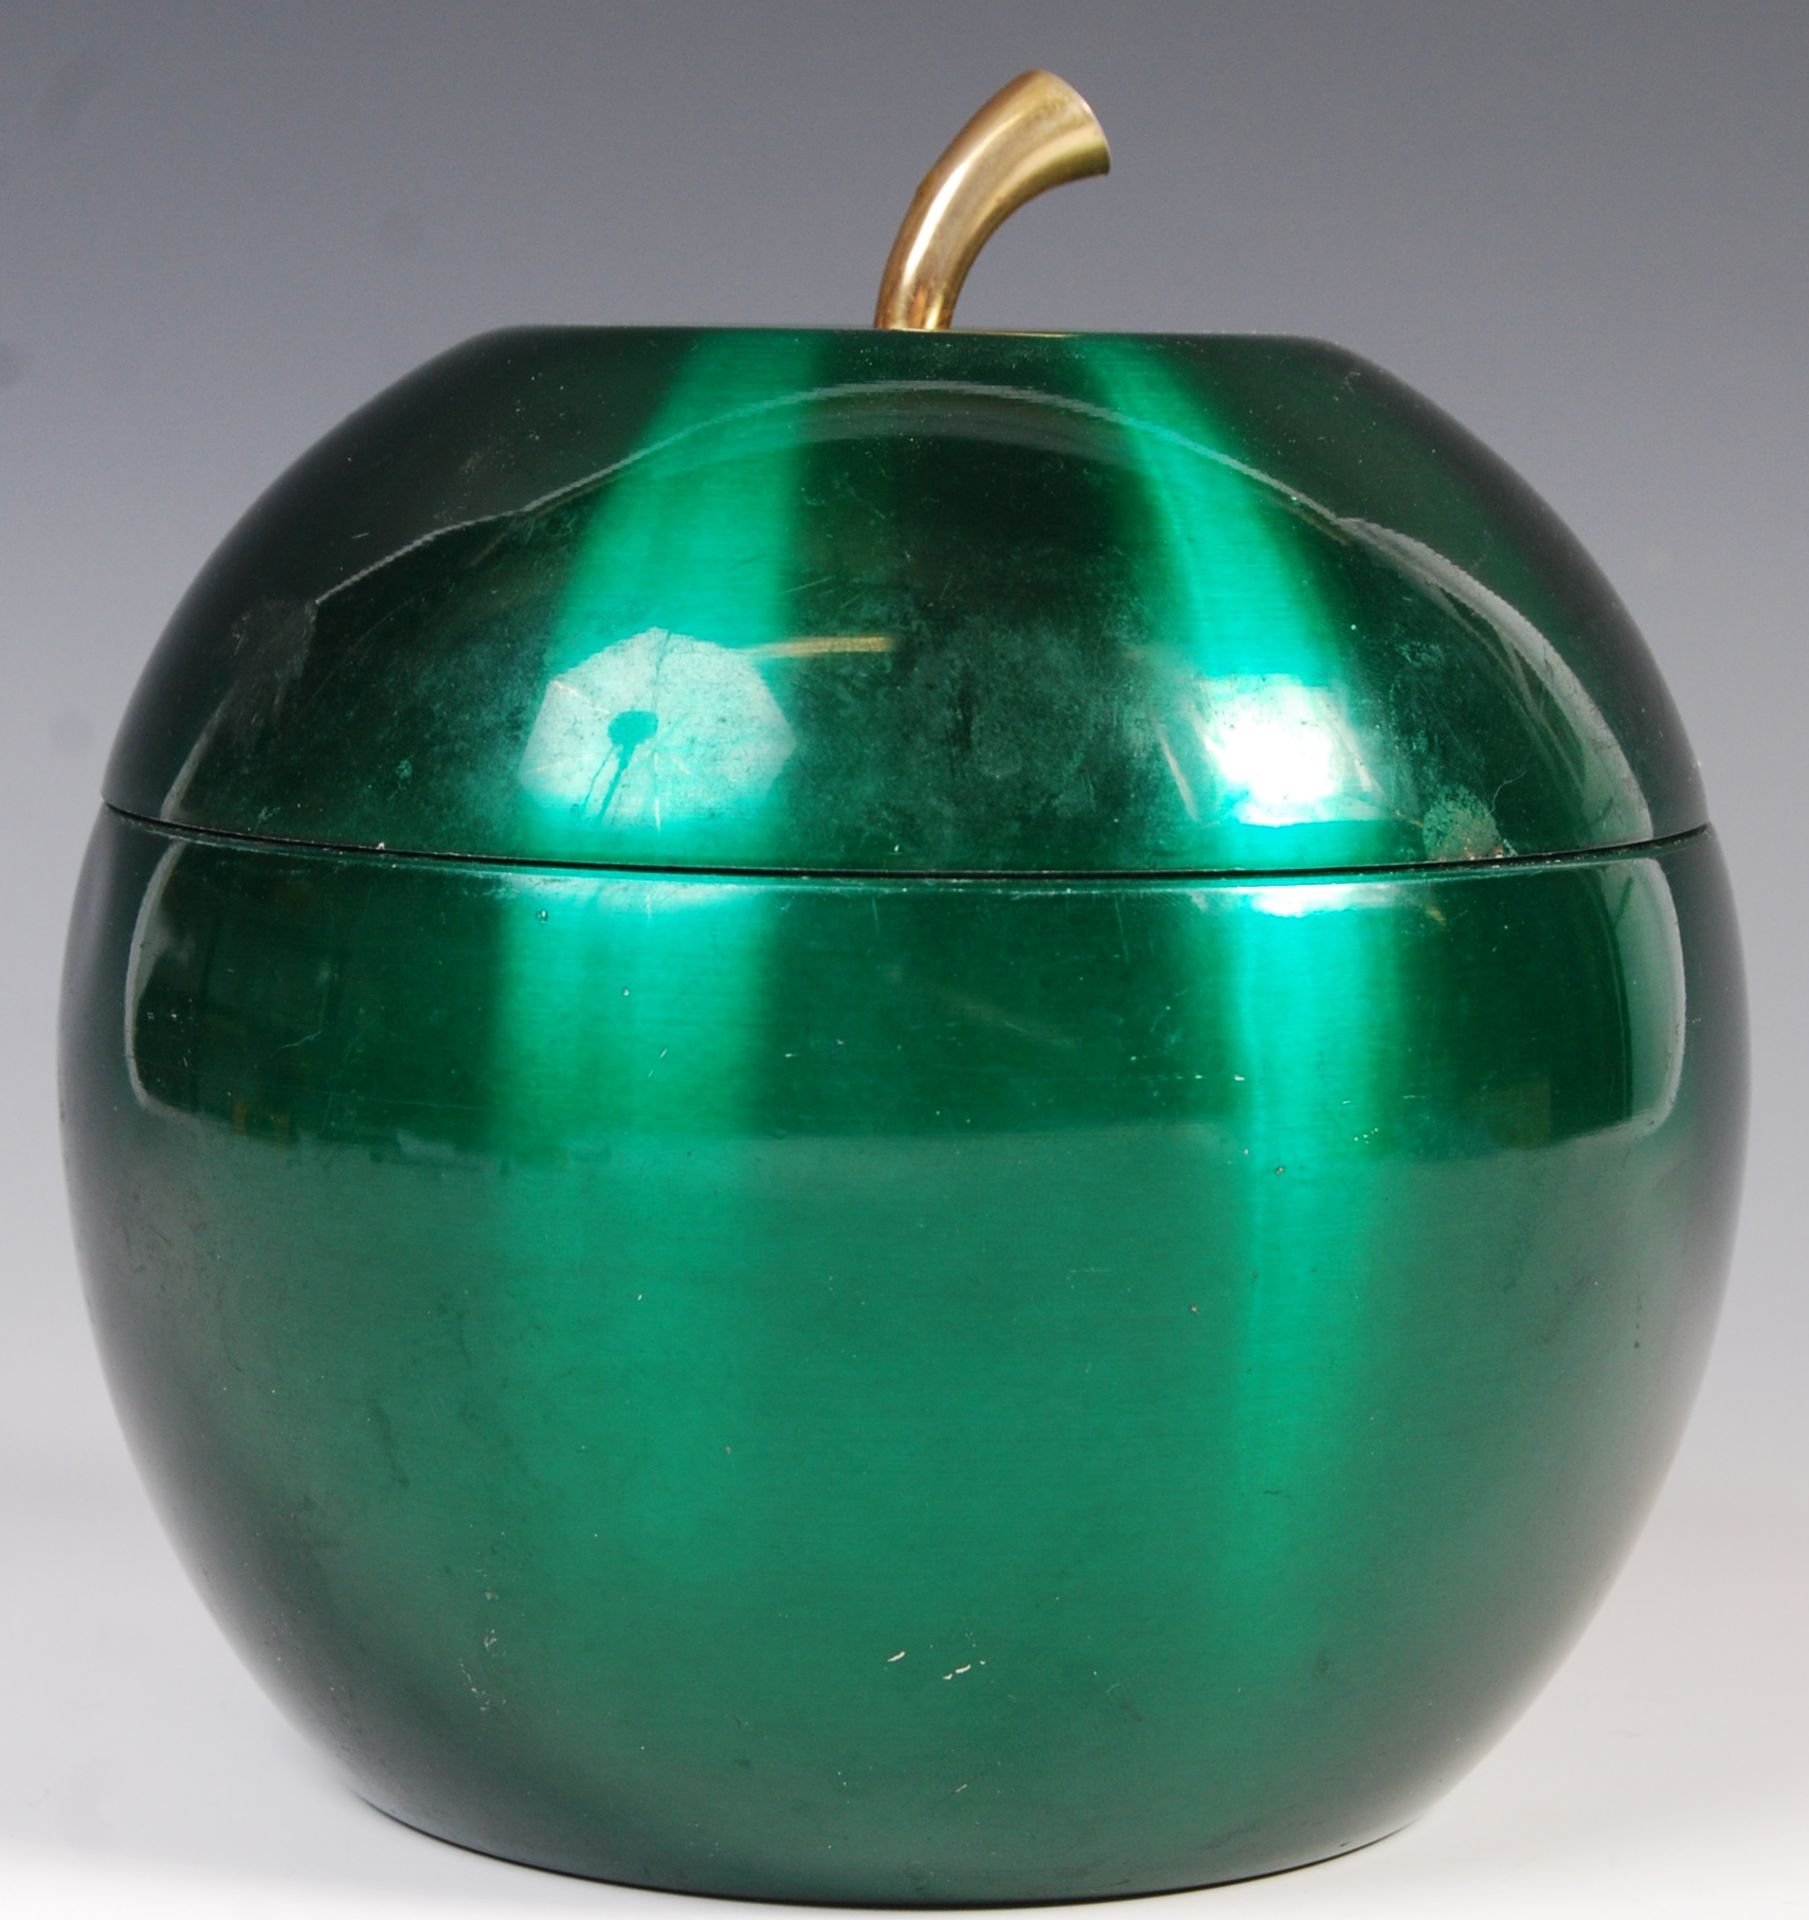 LEMAR 1960'S ASPREY STYLE ICE BUCKET IN THE FORM OF AN APPLE